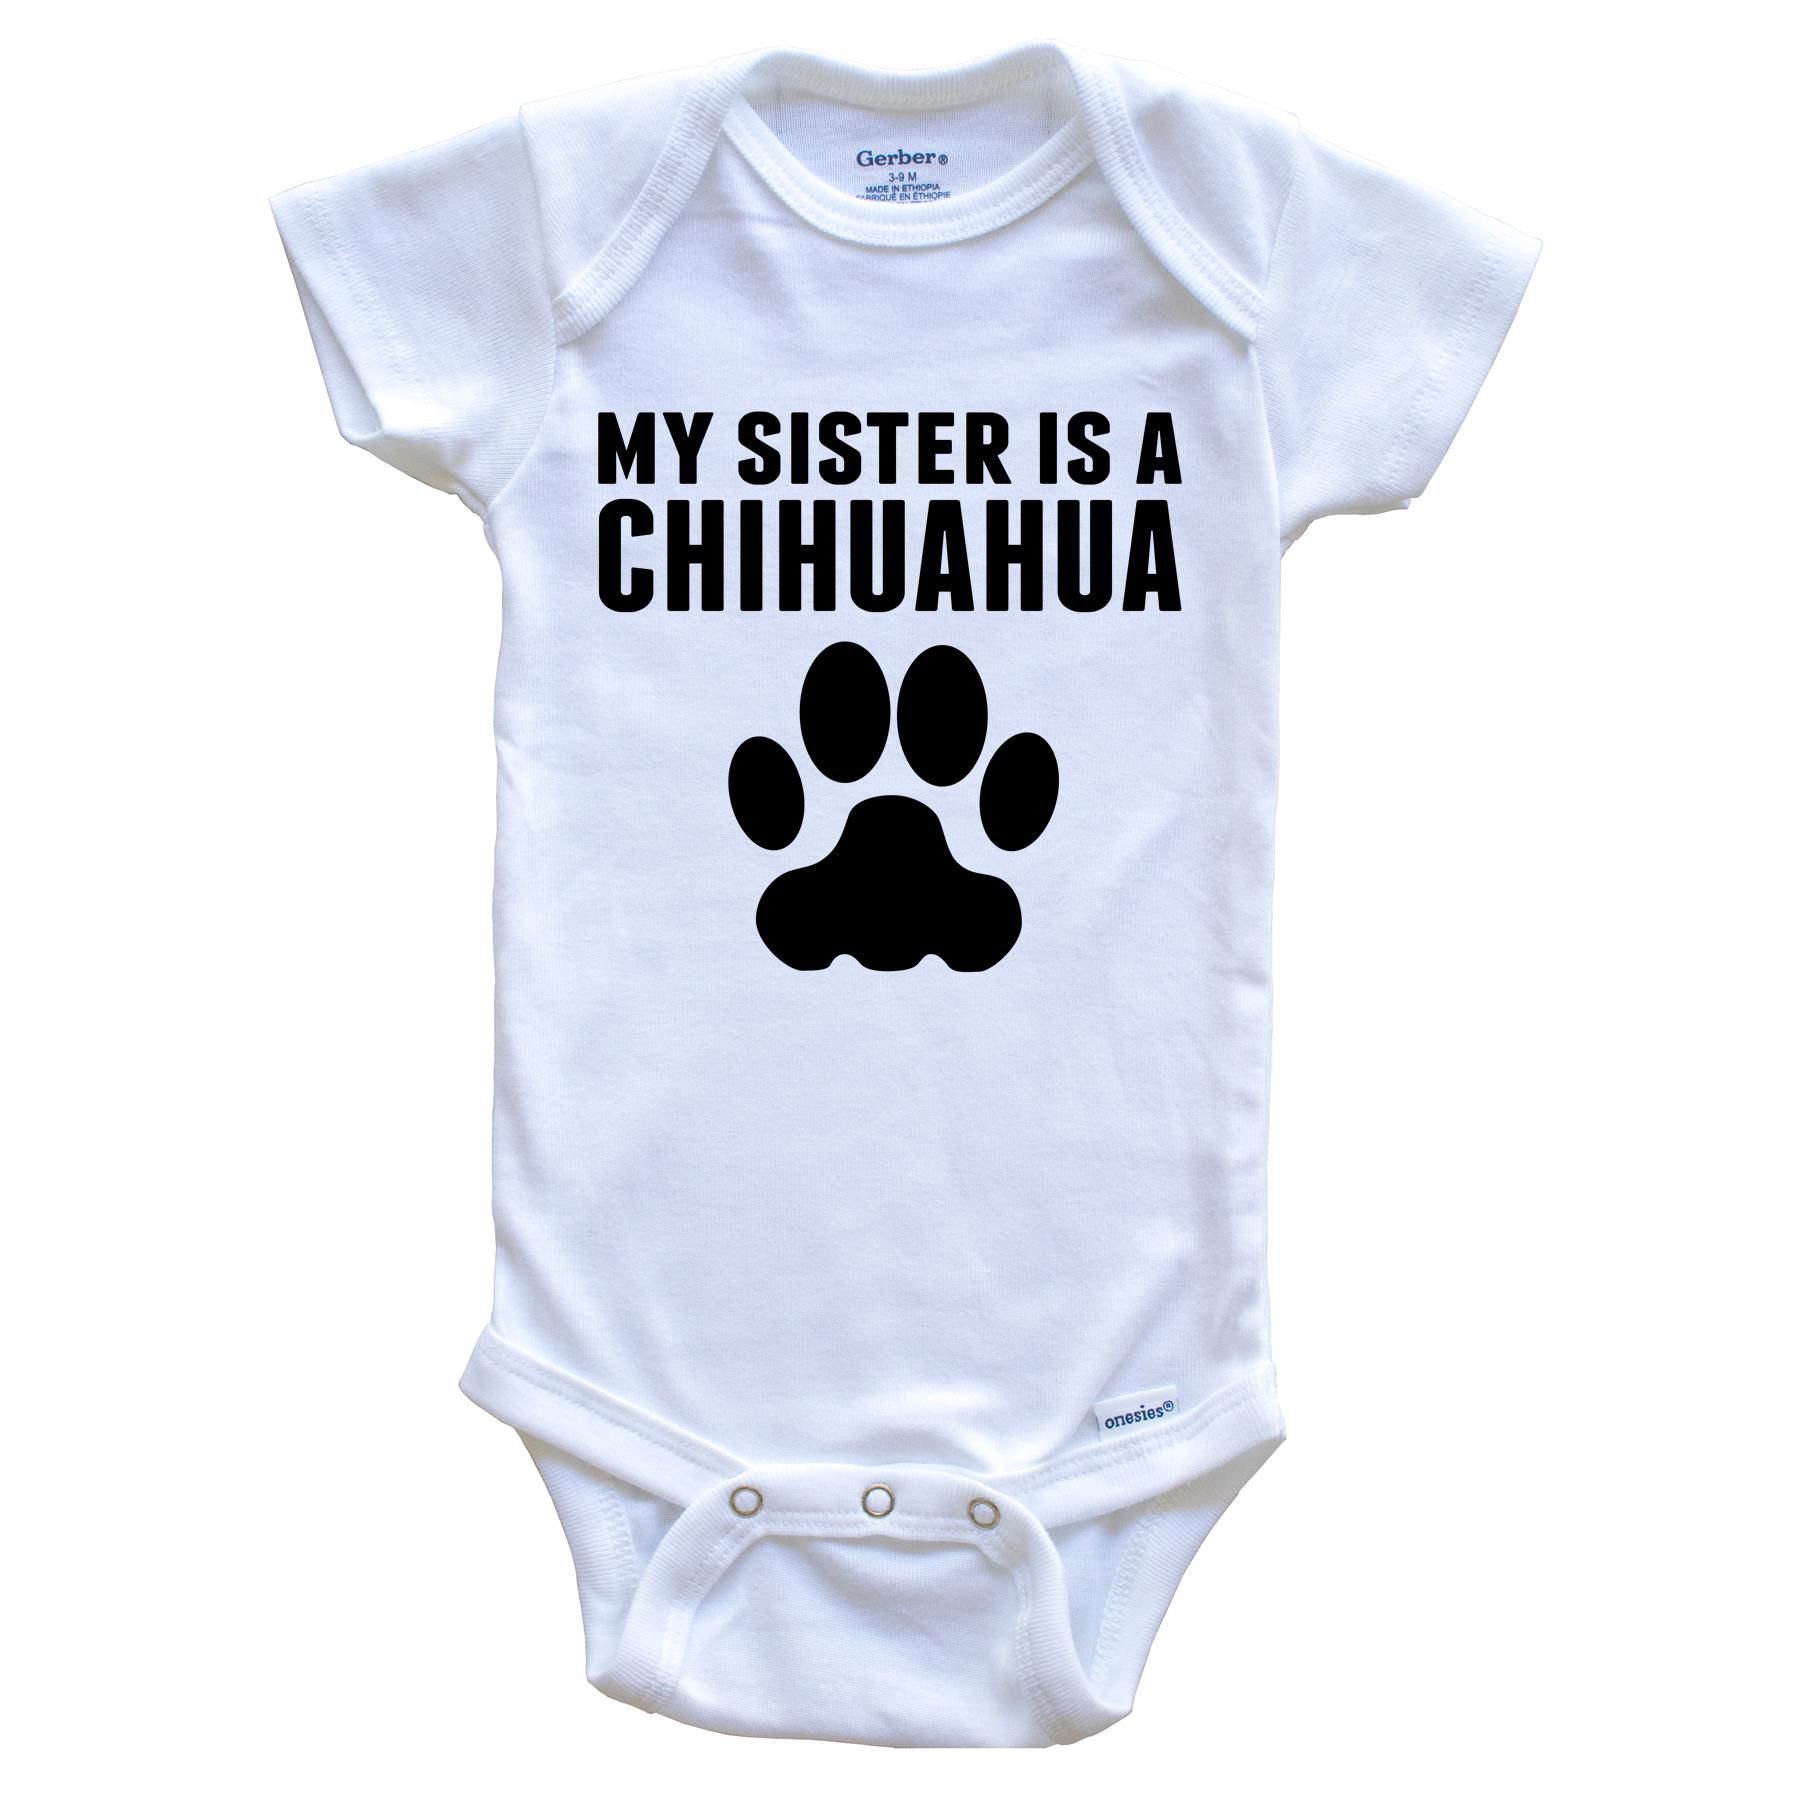 My Sister Is A Chihuahua Baby Onesie